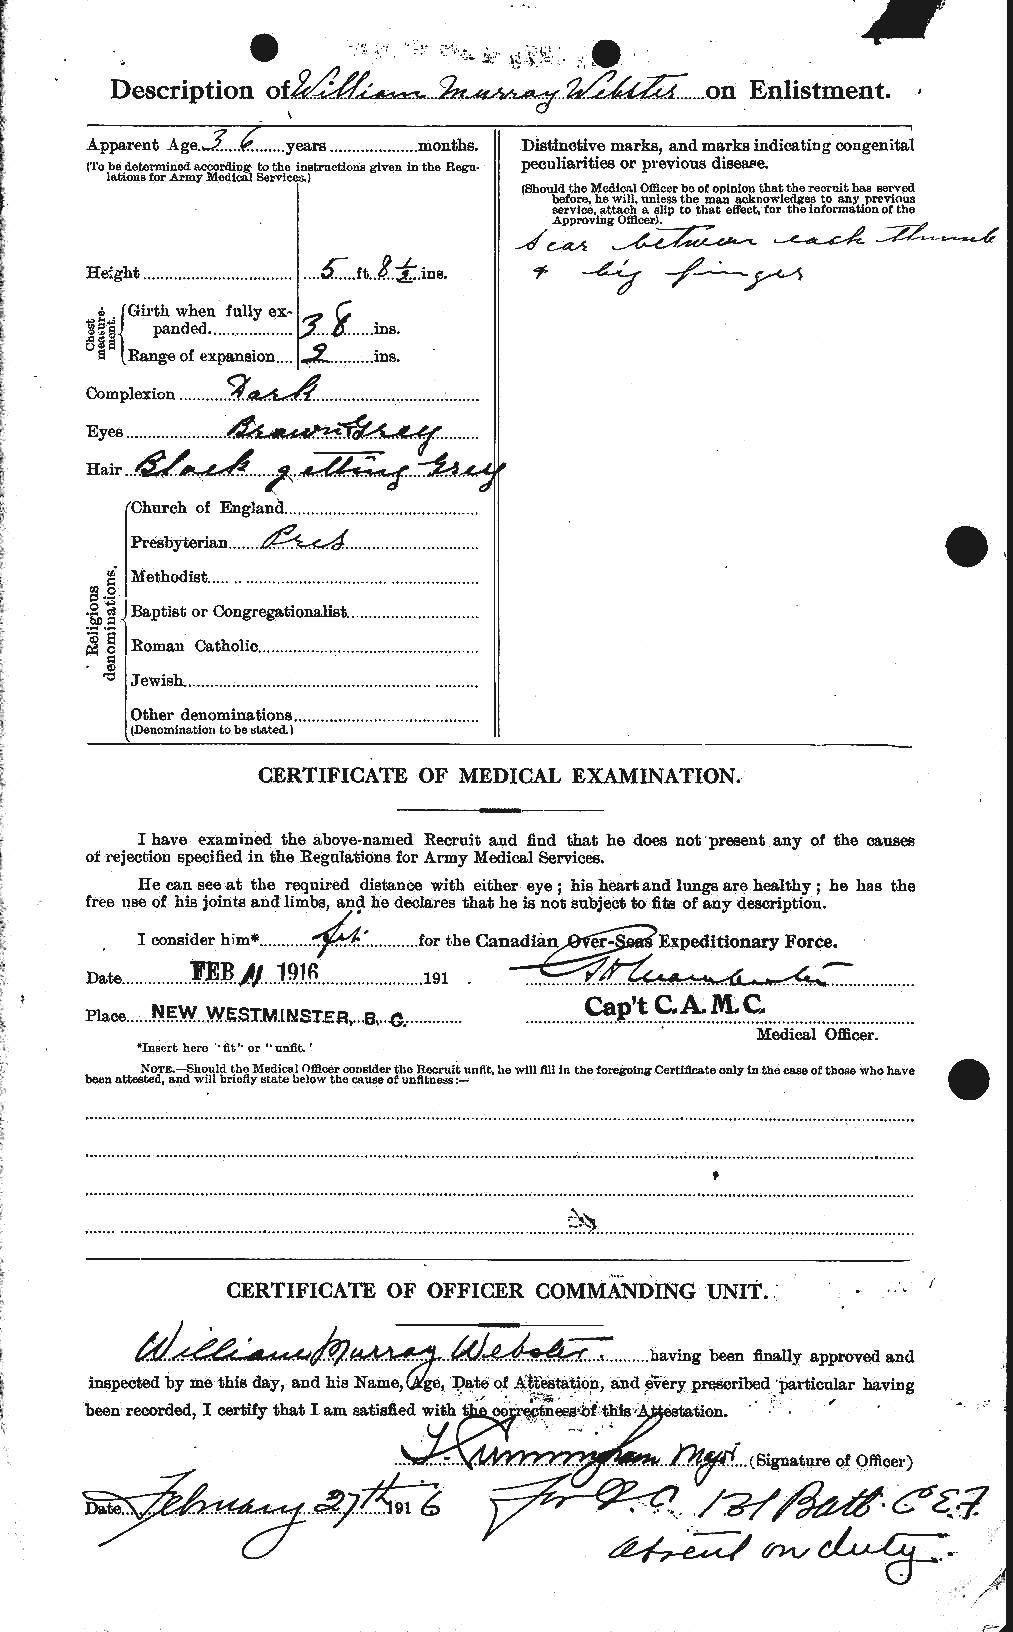 Personnel Records of the First World War - CEF 662034b